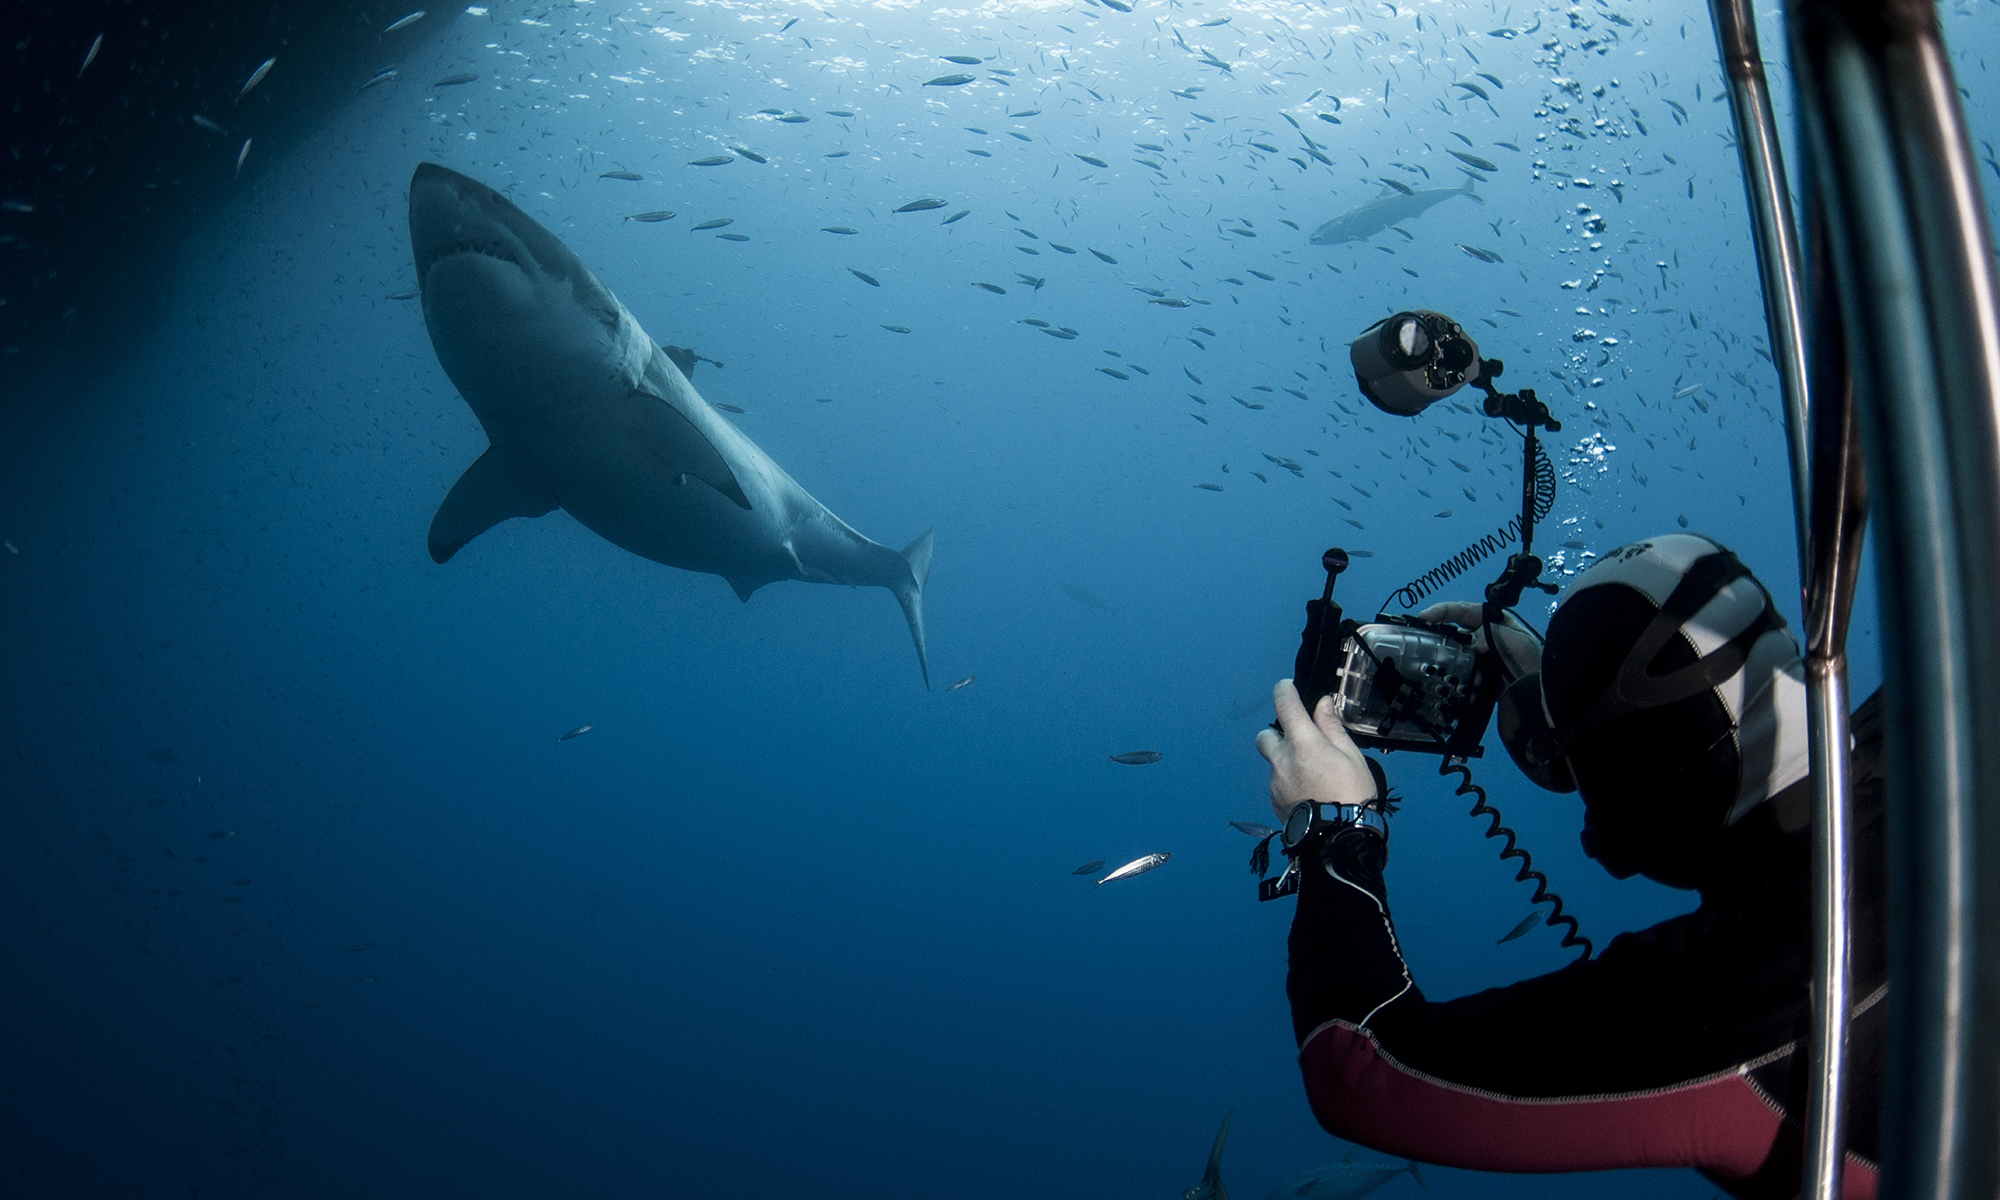 Tourist Taking a Picture of a Great White Shark